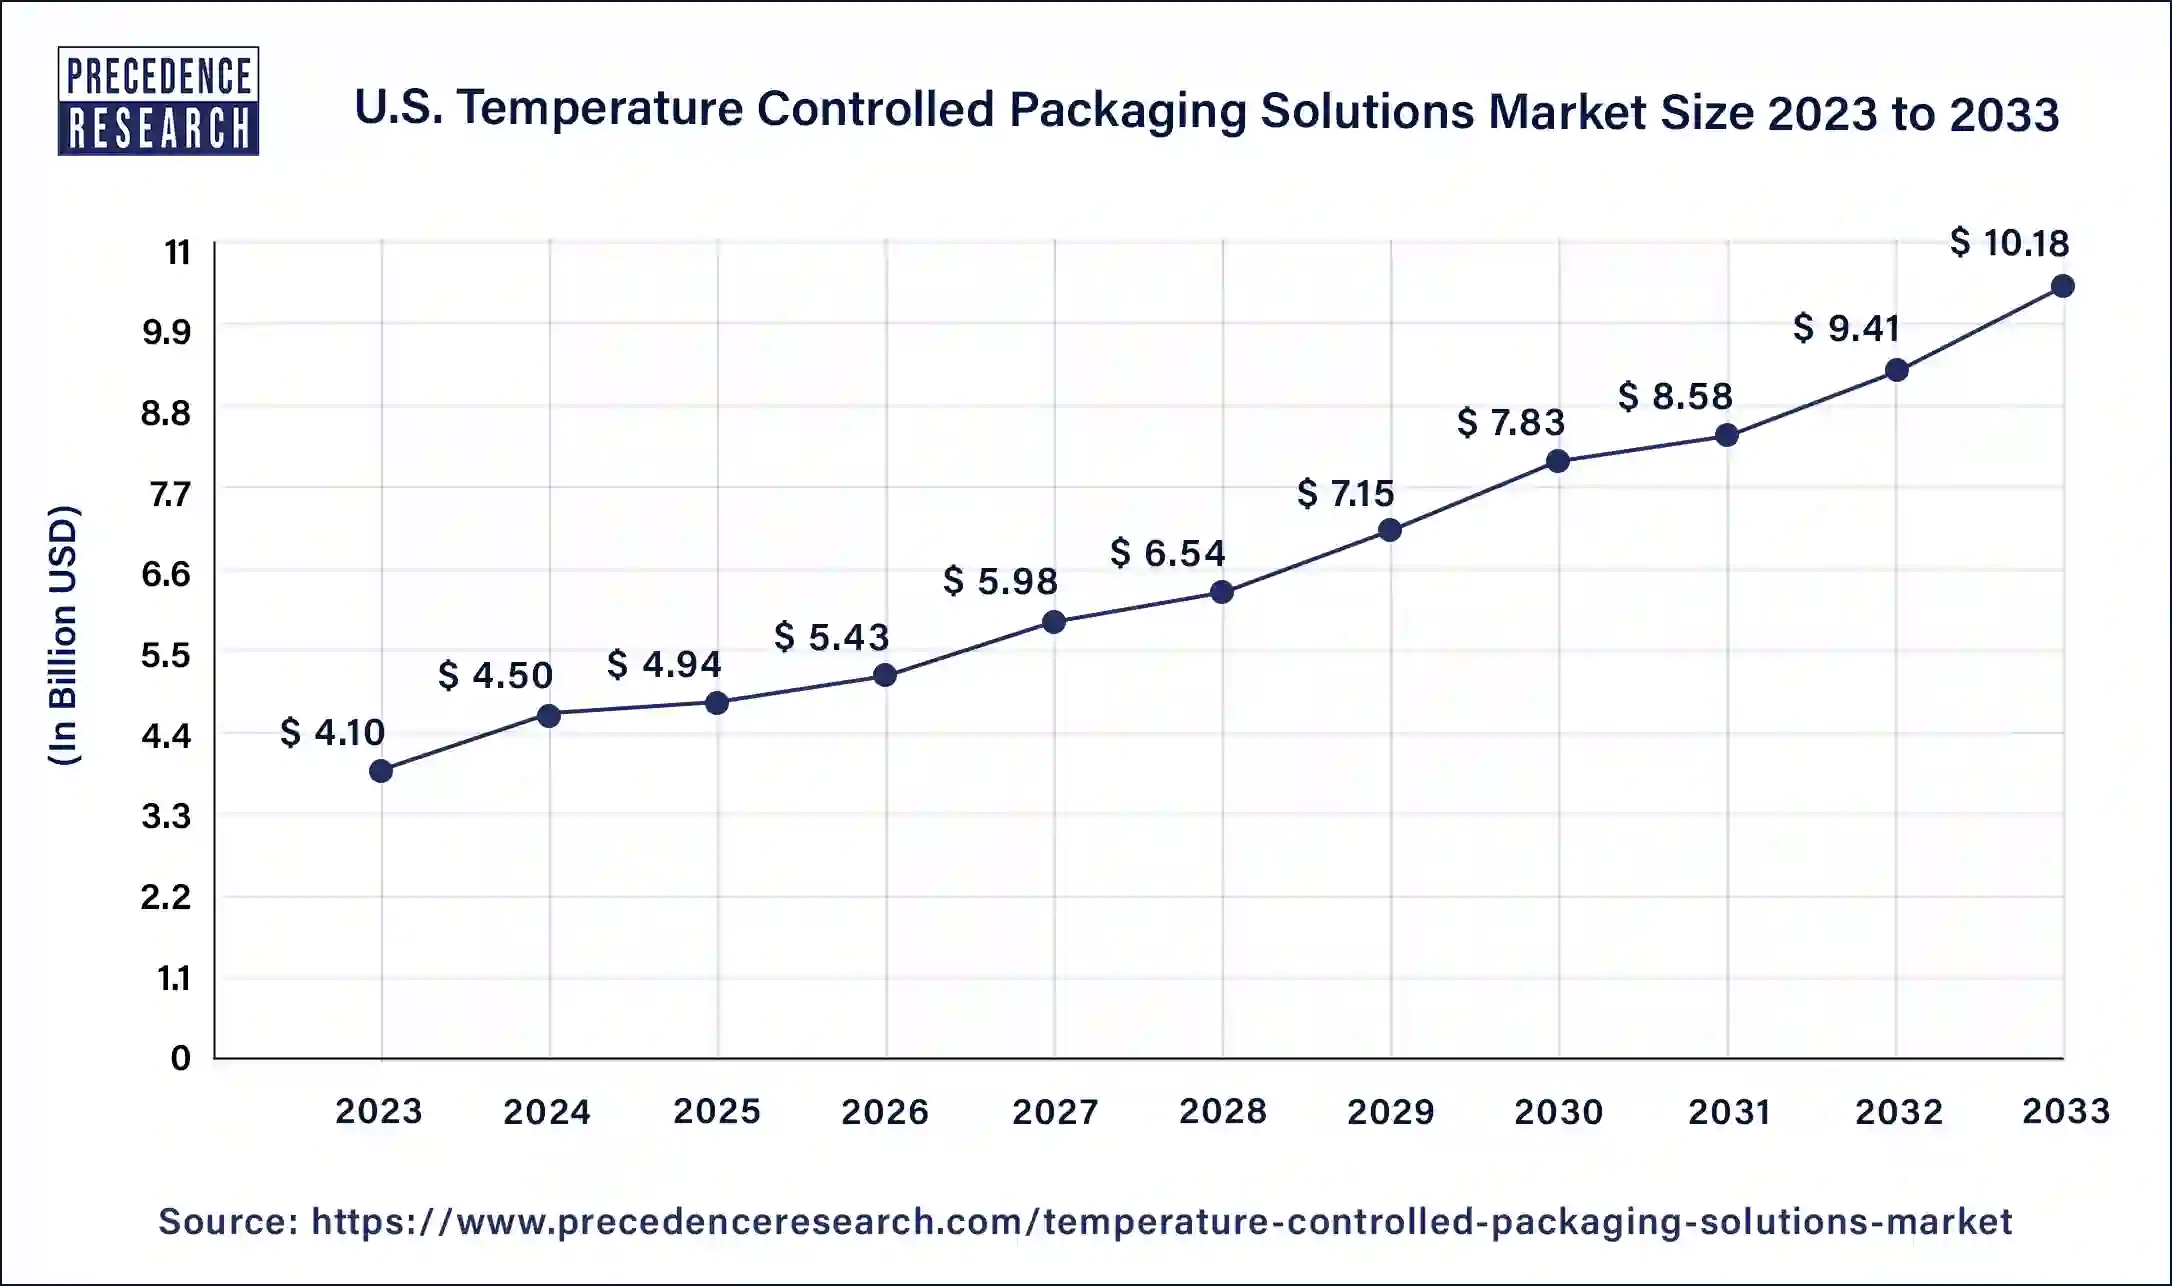 U.S. Temperature Controlled Packaging Solutions Market Size 2024 to 2033